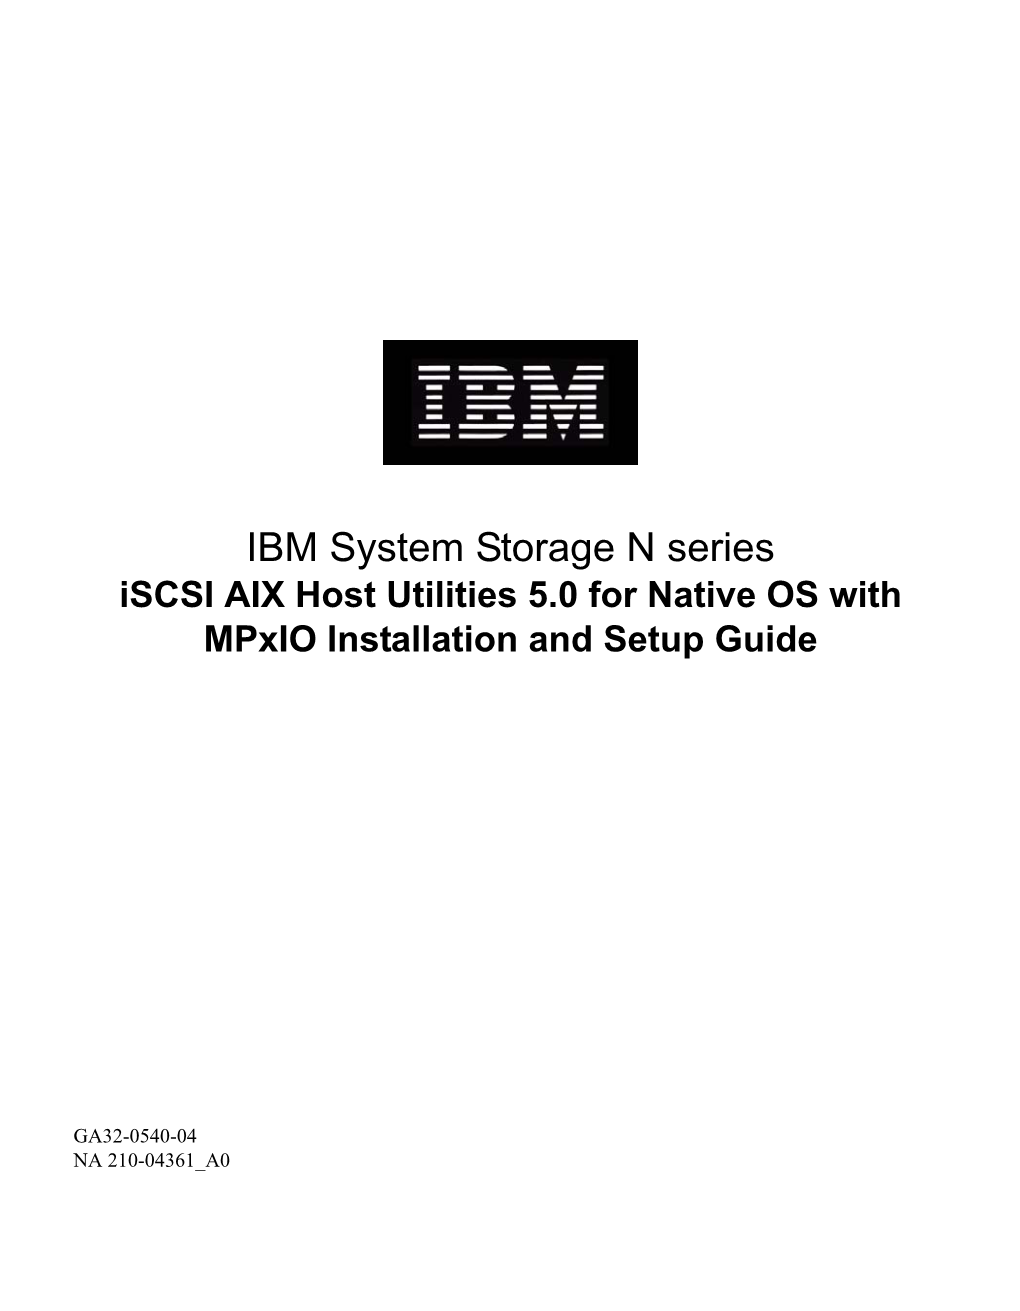 IBM System Storage N Series Iscsi AIX Host Utilities 5.0 for Native OS with Mpxio Installation and Setup Guide